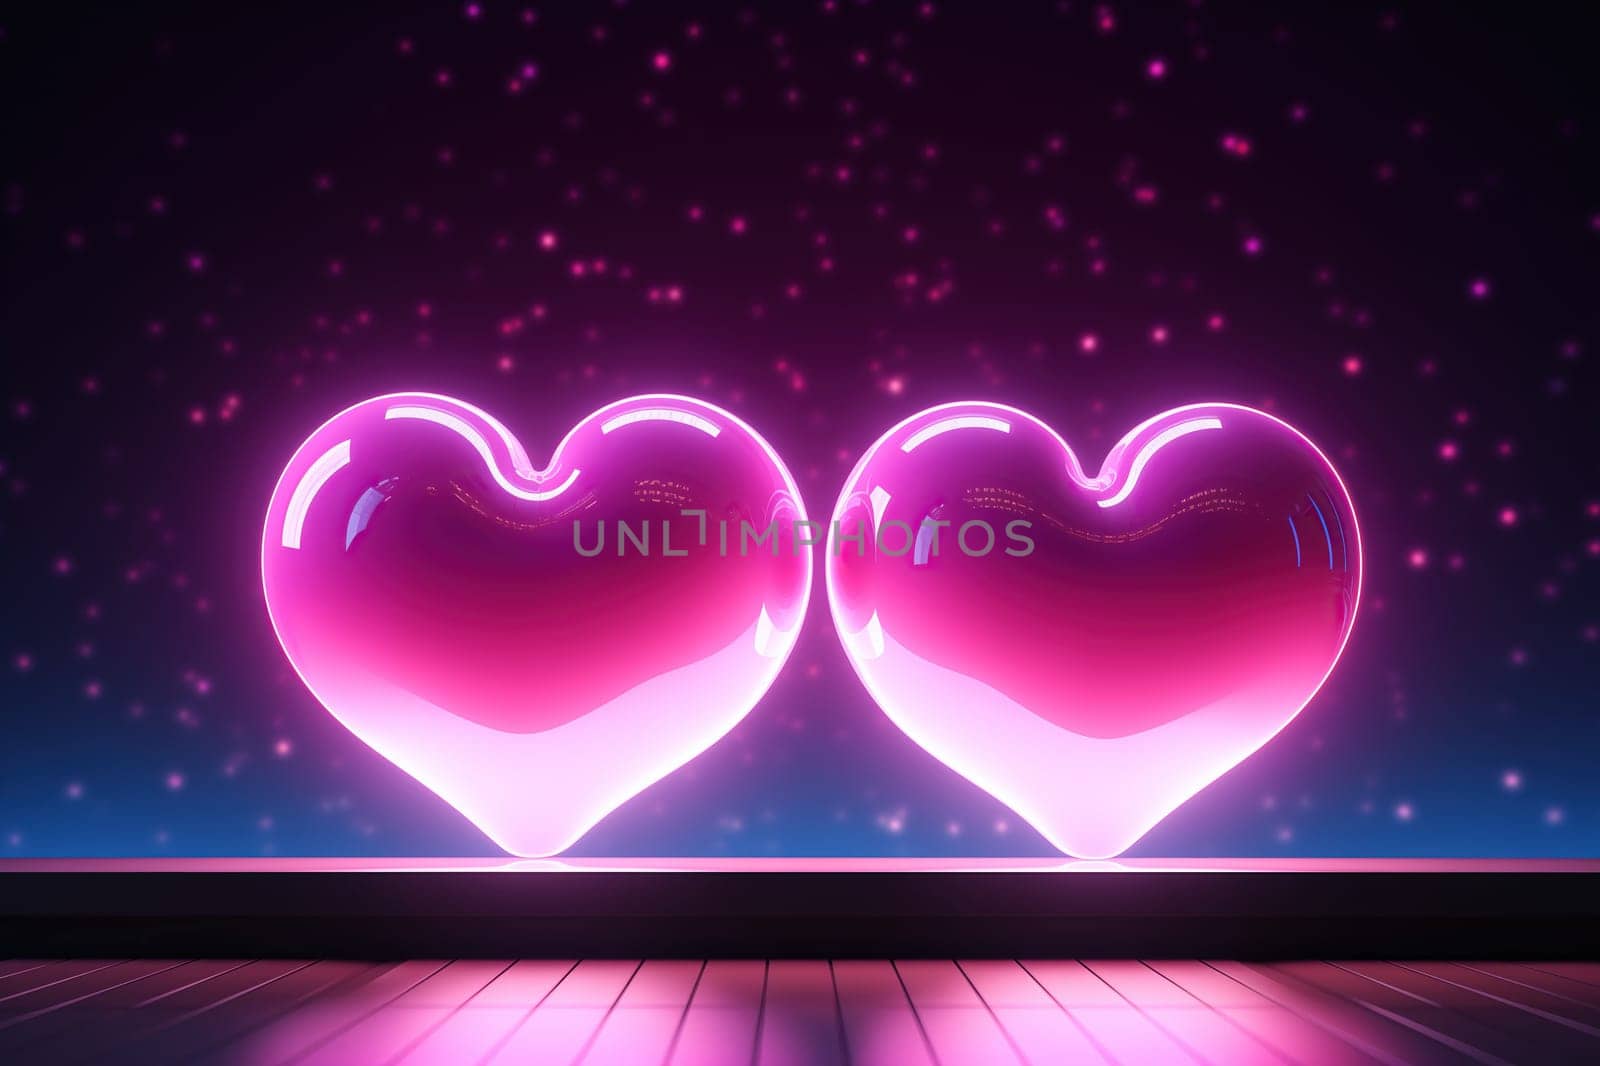 Two large pink hearts with a neon glow on a blue background. Valentine's Day concept. Generated by artificial intelligence by Vovmar